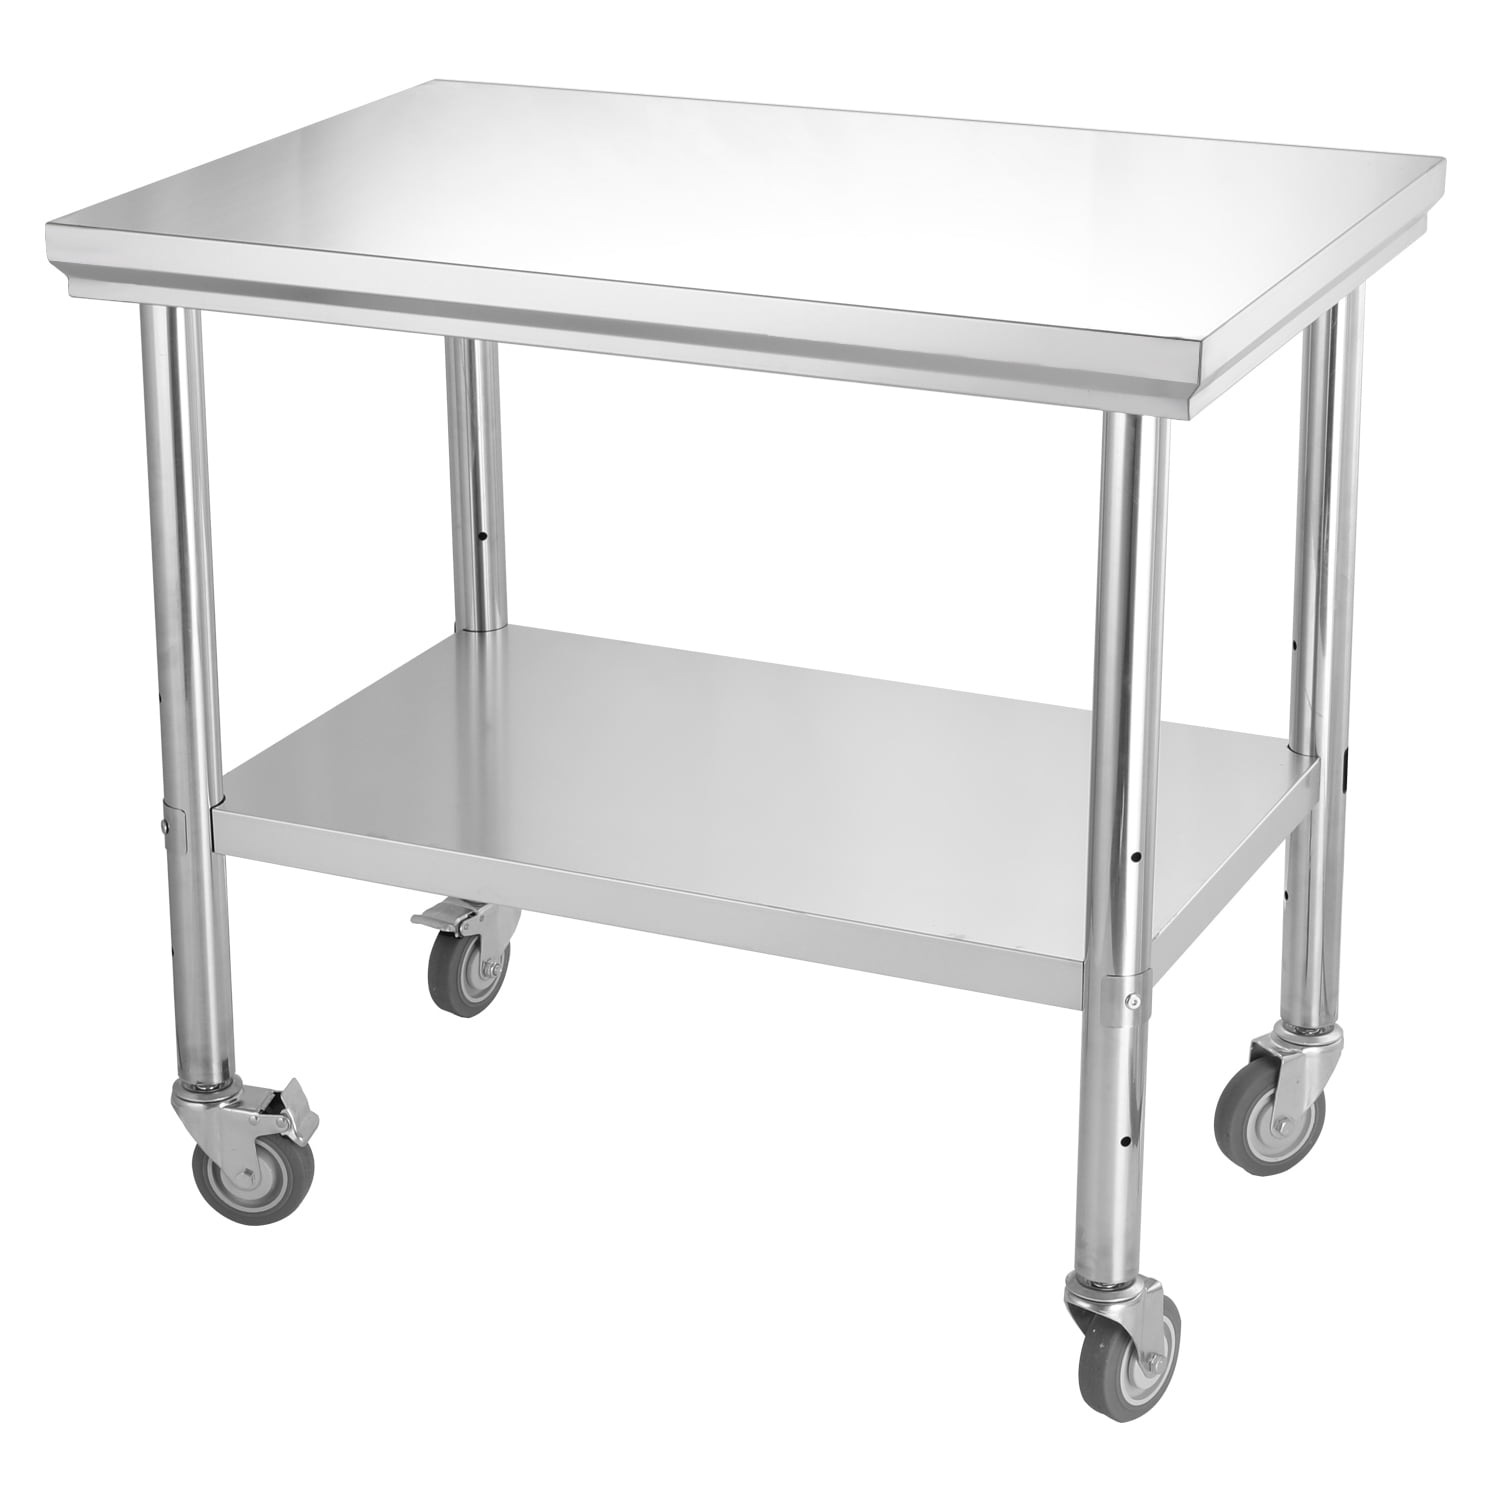 36x24x34 inch Stainless Steel Work Table Adjustable Shelf with 4 Wheels ...